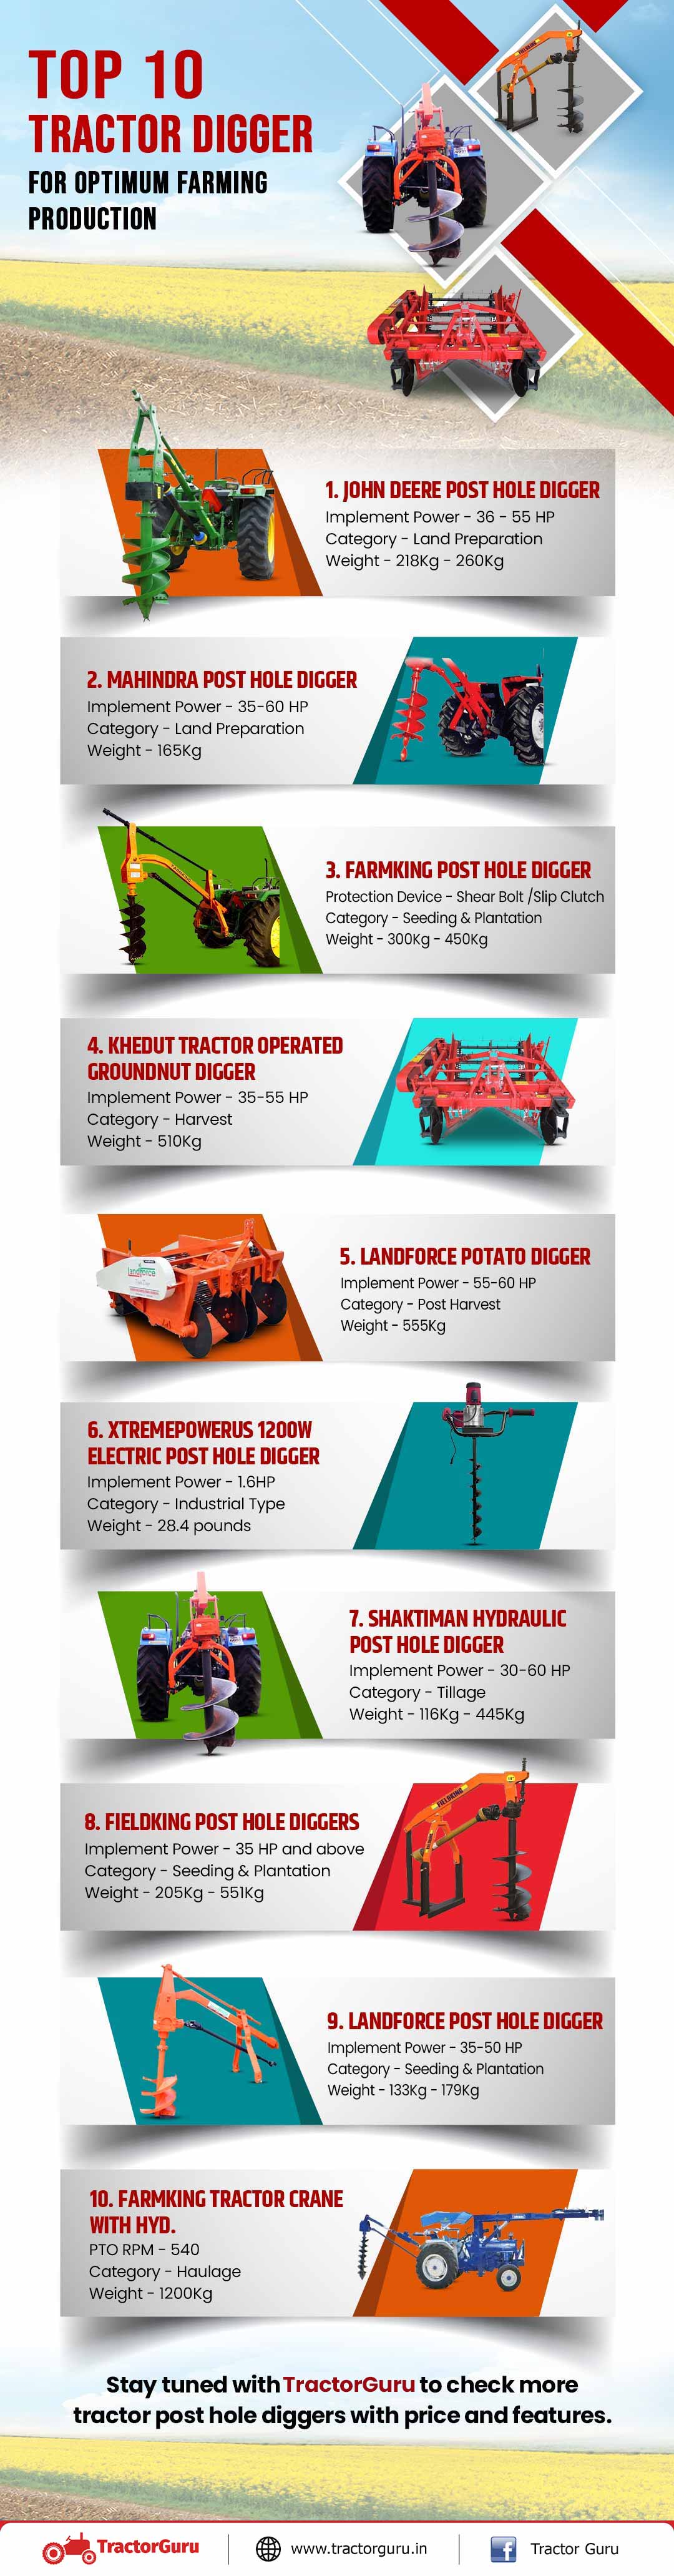 Infographic Top 10 Tractor Digger For Optimum Farming Production